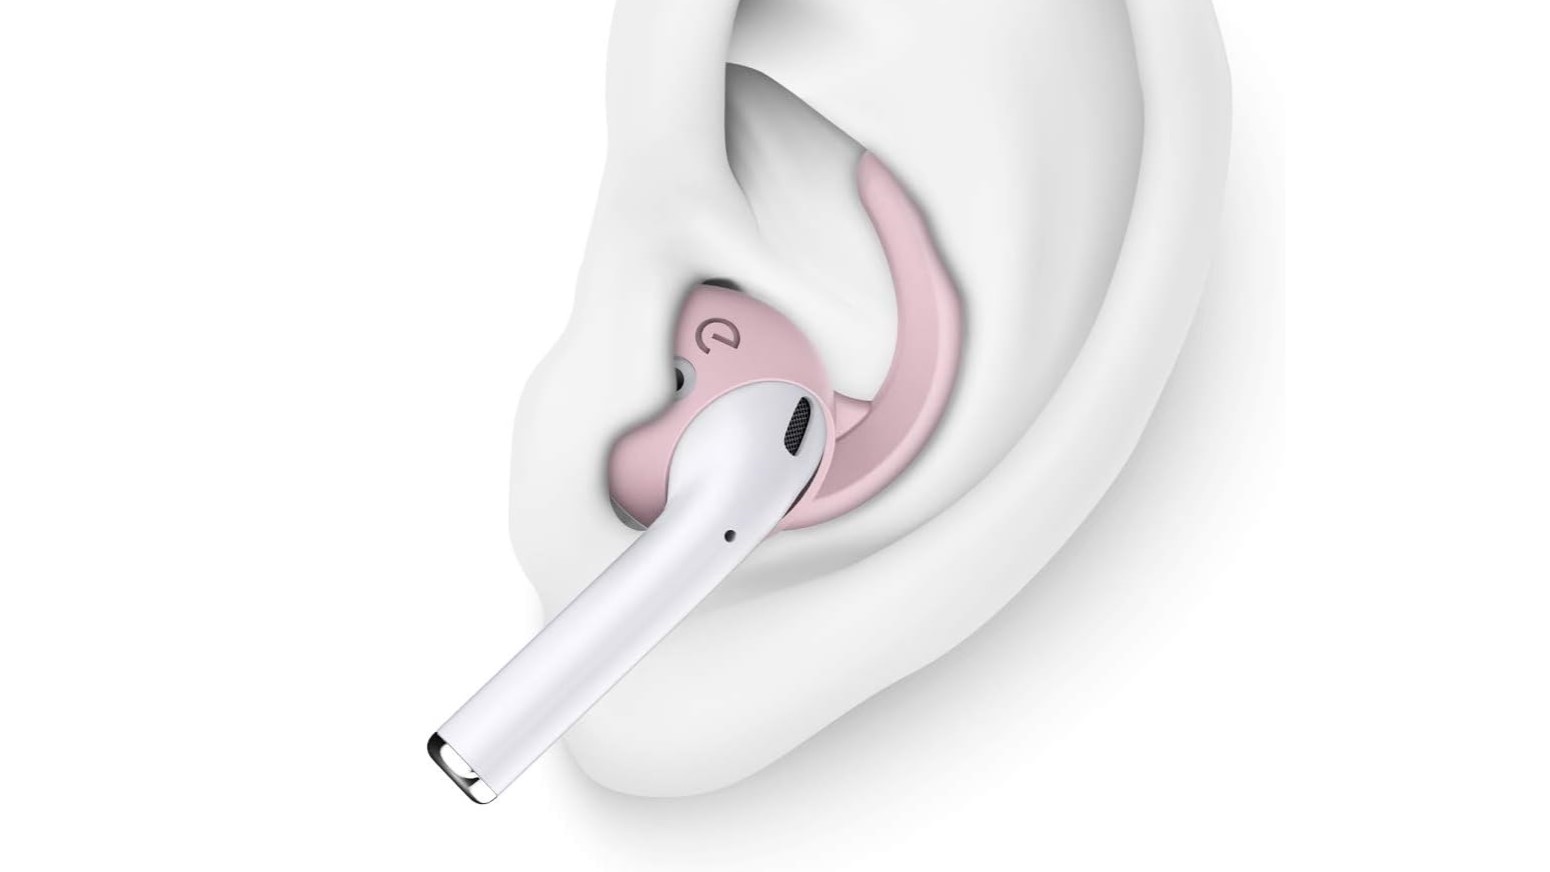 an illustration of the earbuddyz ear hooks for airpods fitting securely in a human ear